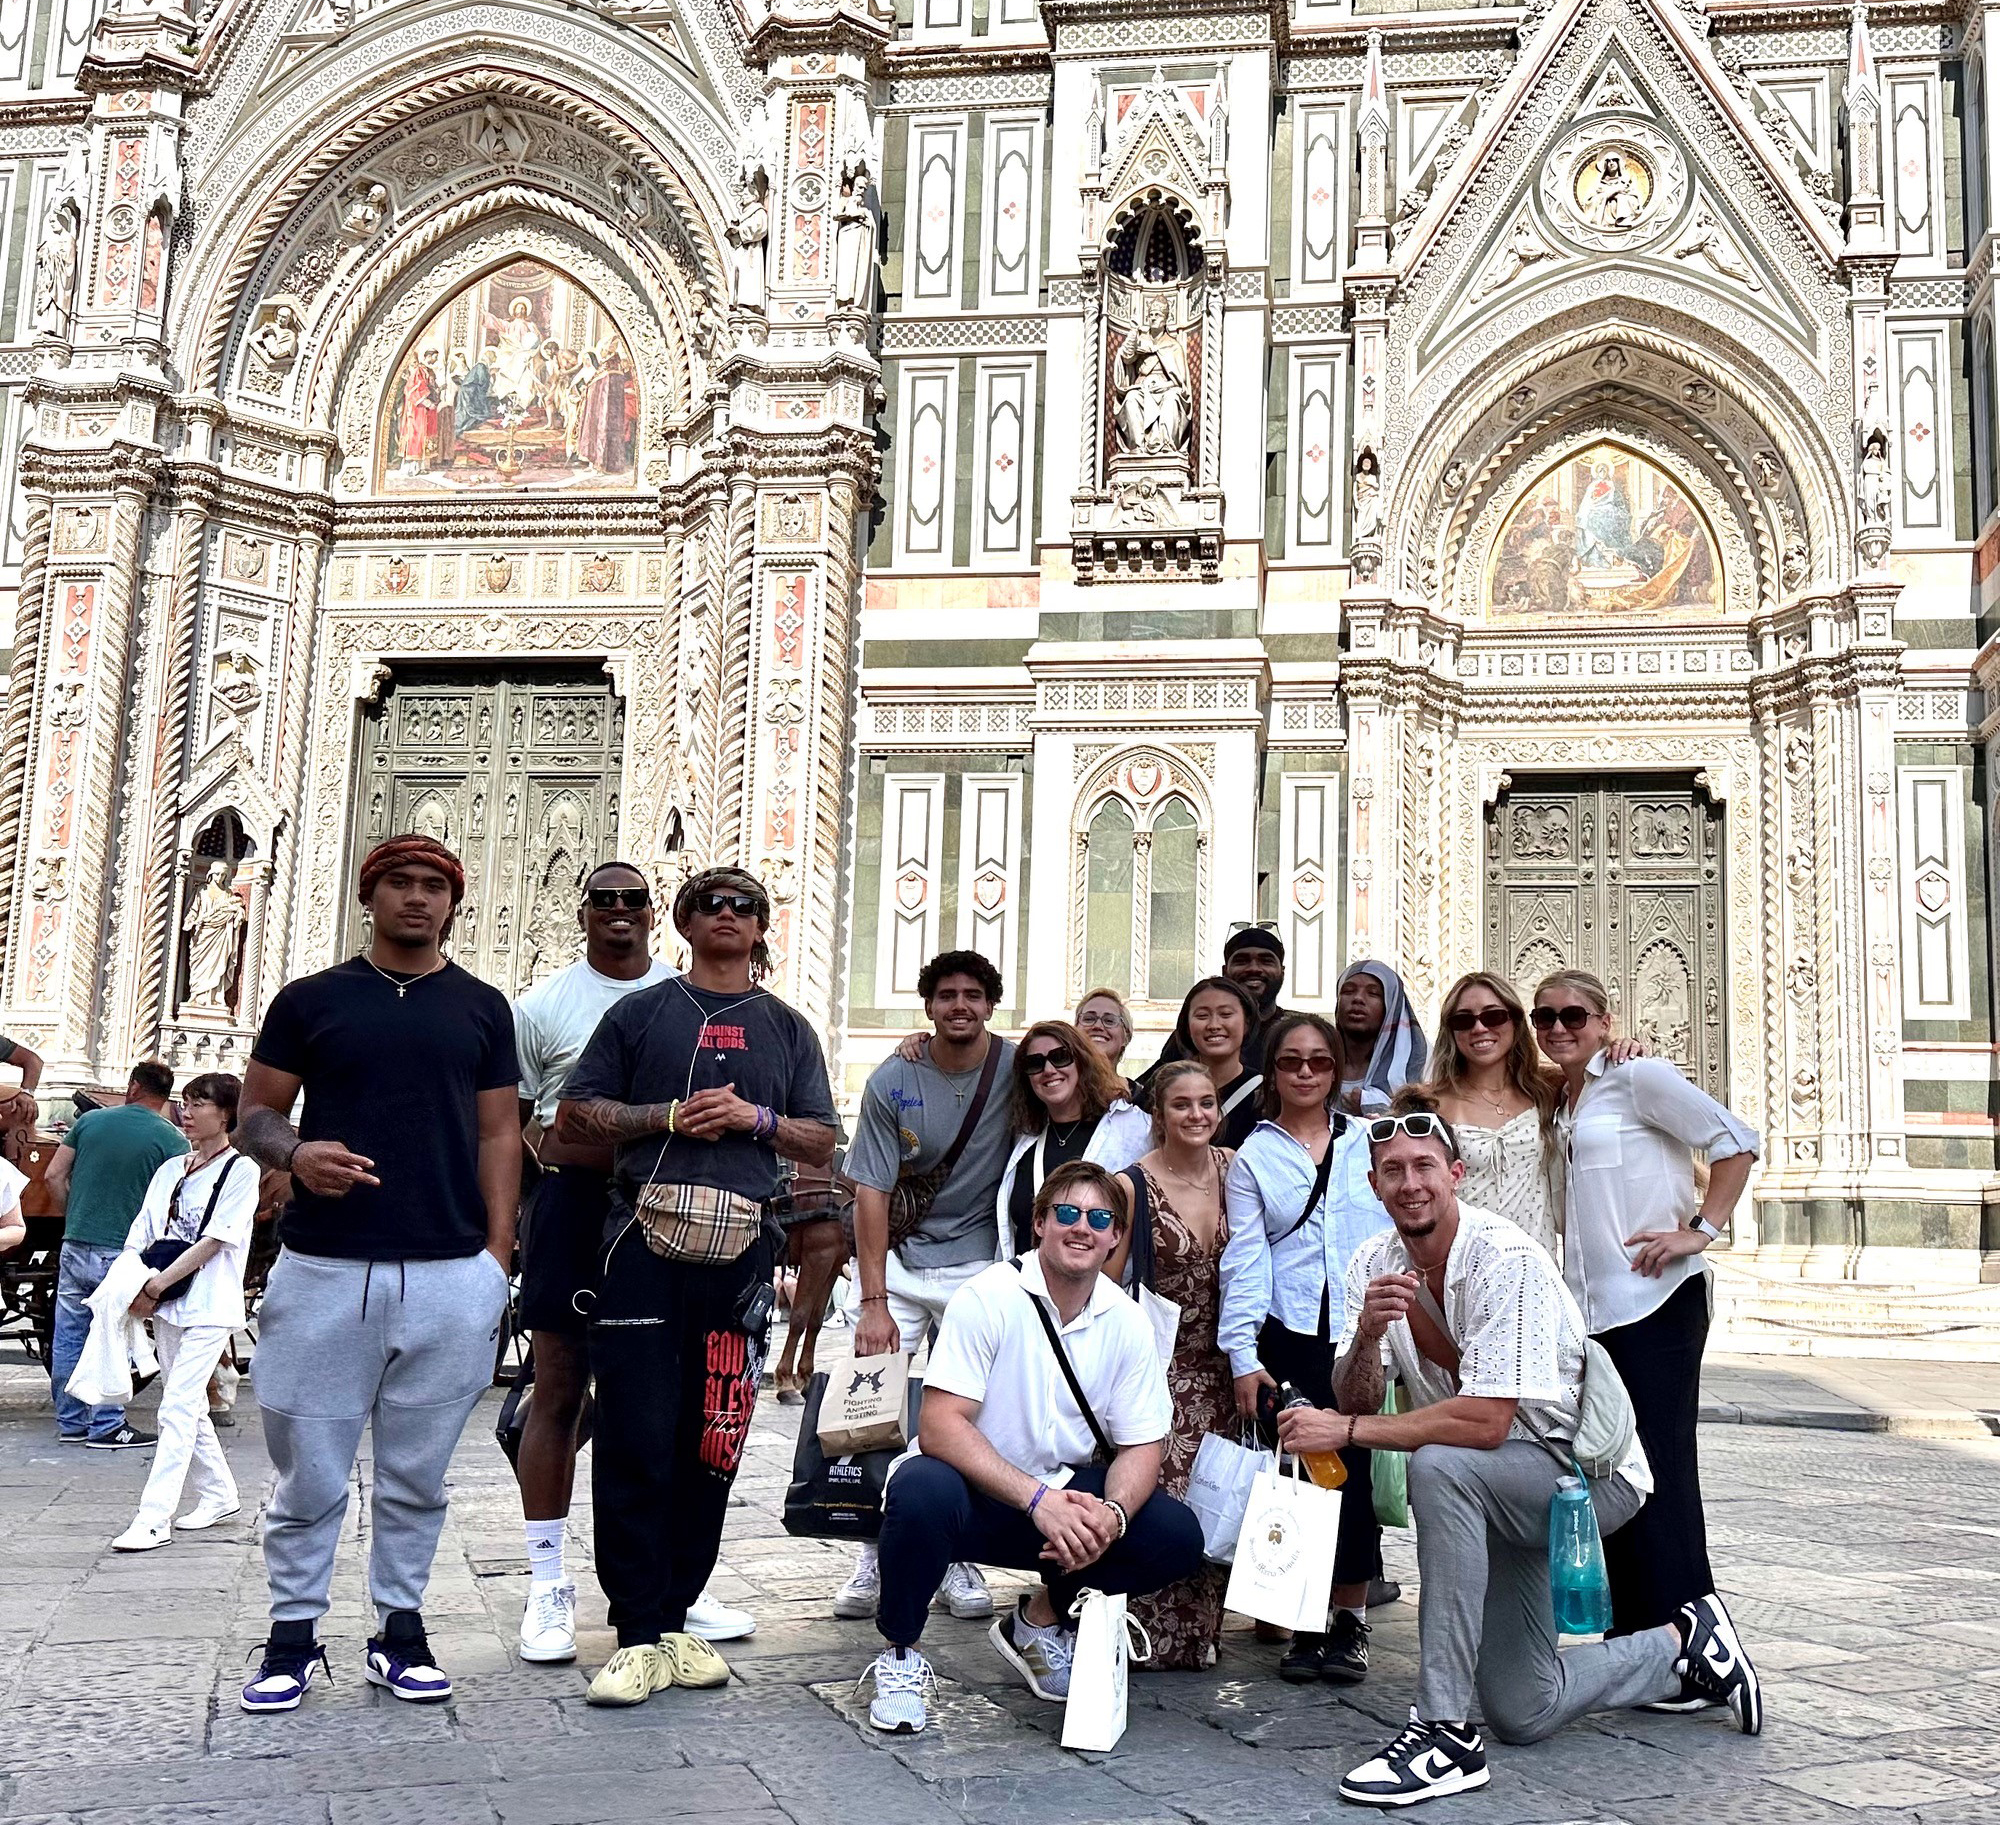 The group posed in front of the Duomo in Florence, Italy.